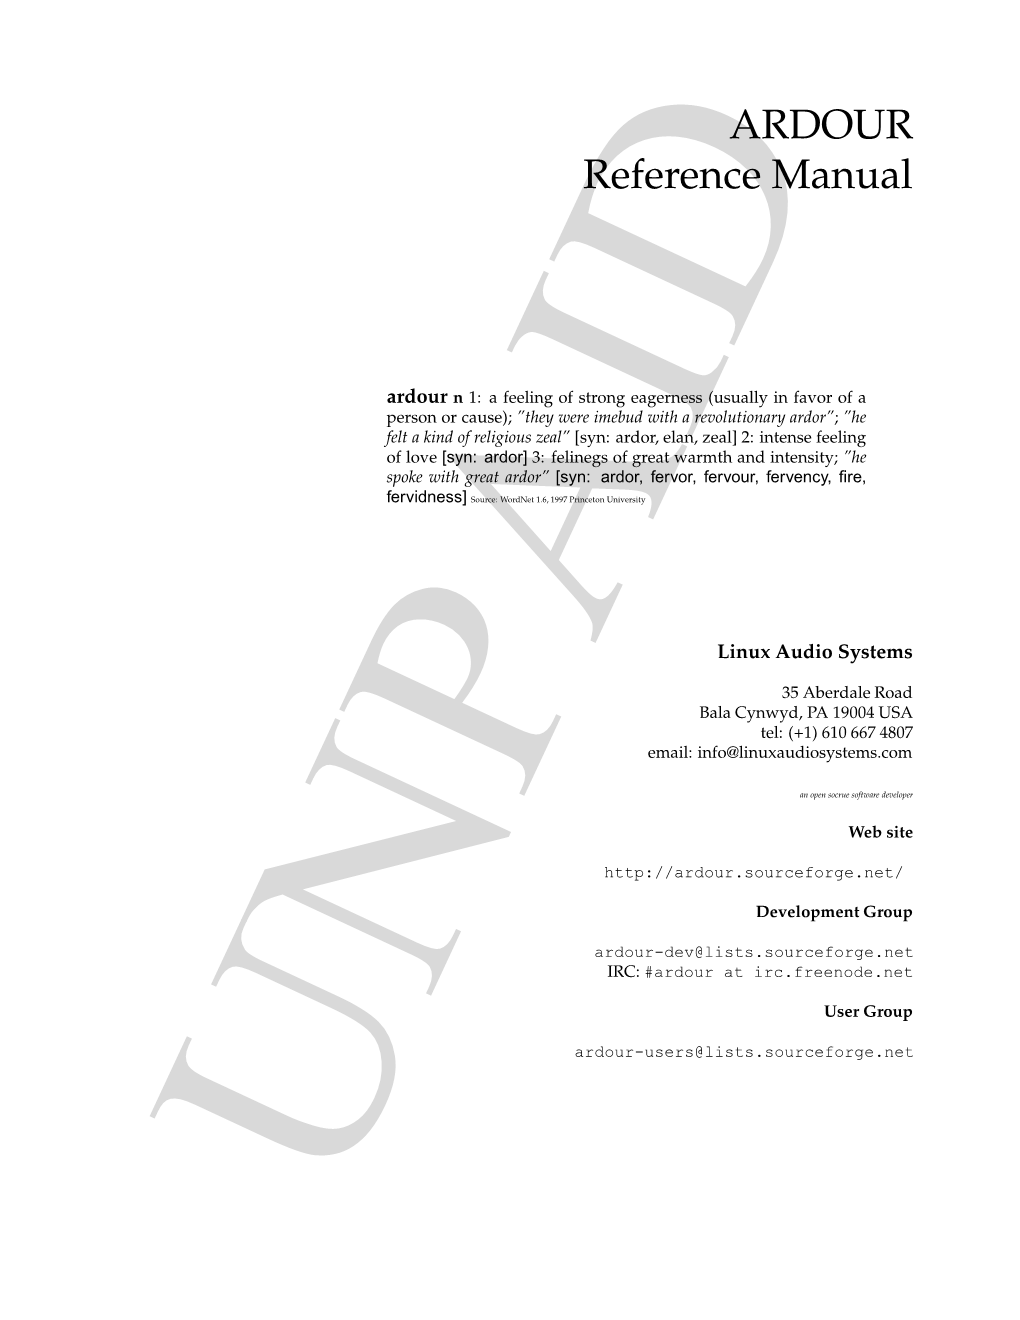 ARDOUR Reference Manual